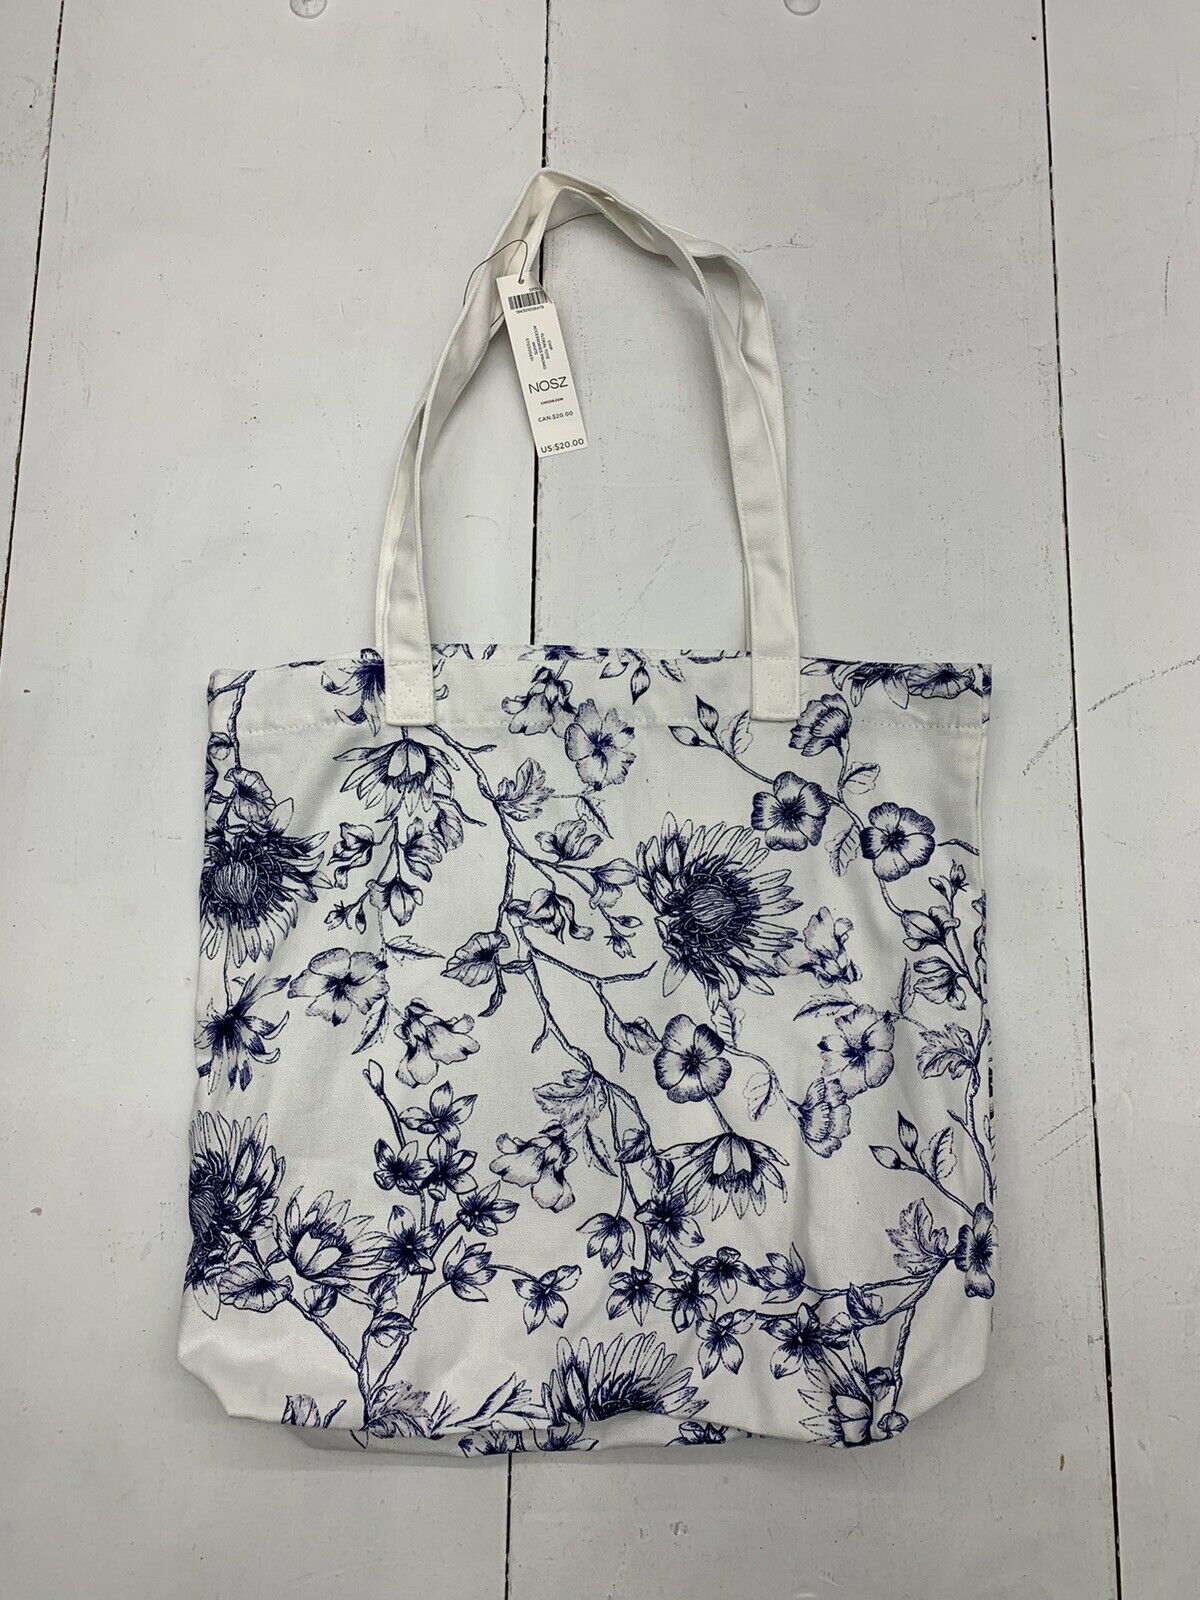 Chico's Canvas Blue and White Floral Tote Bag Lightweight Sunflower